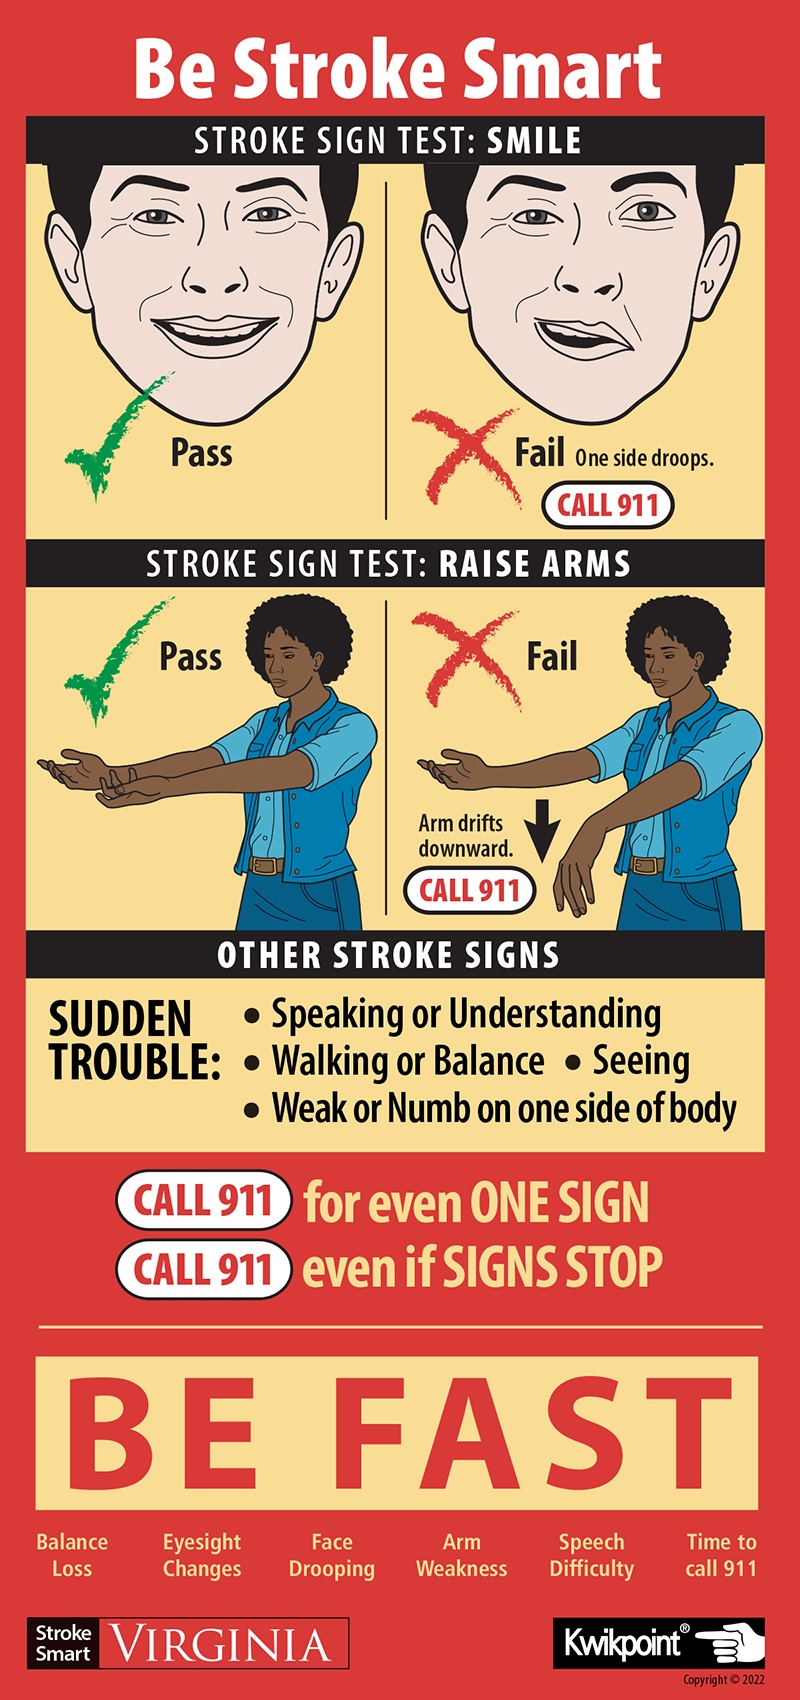 Image of the BE FAST Magnet, which shares the symptoms of a stroke and instructions for seeking help. 